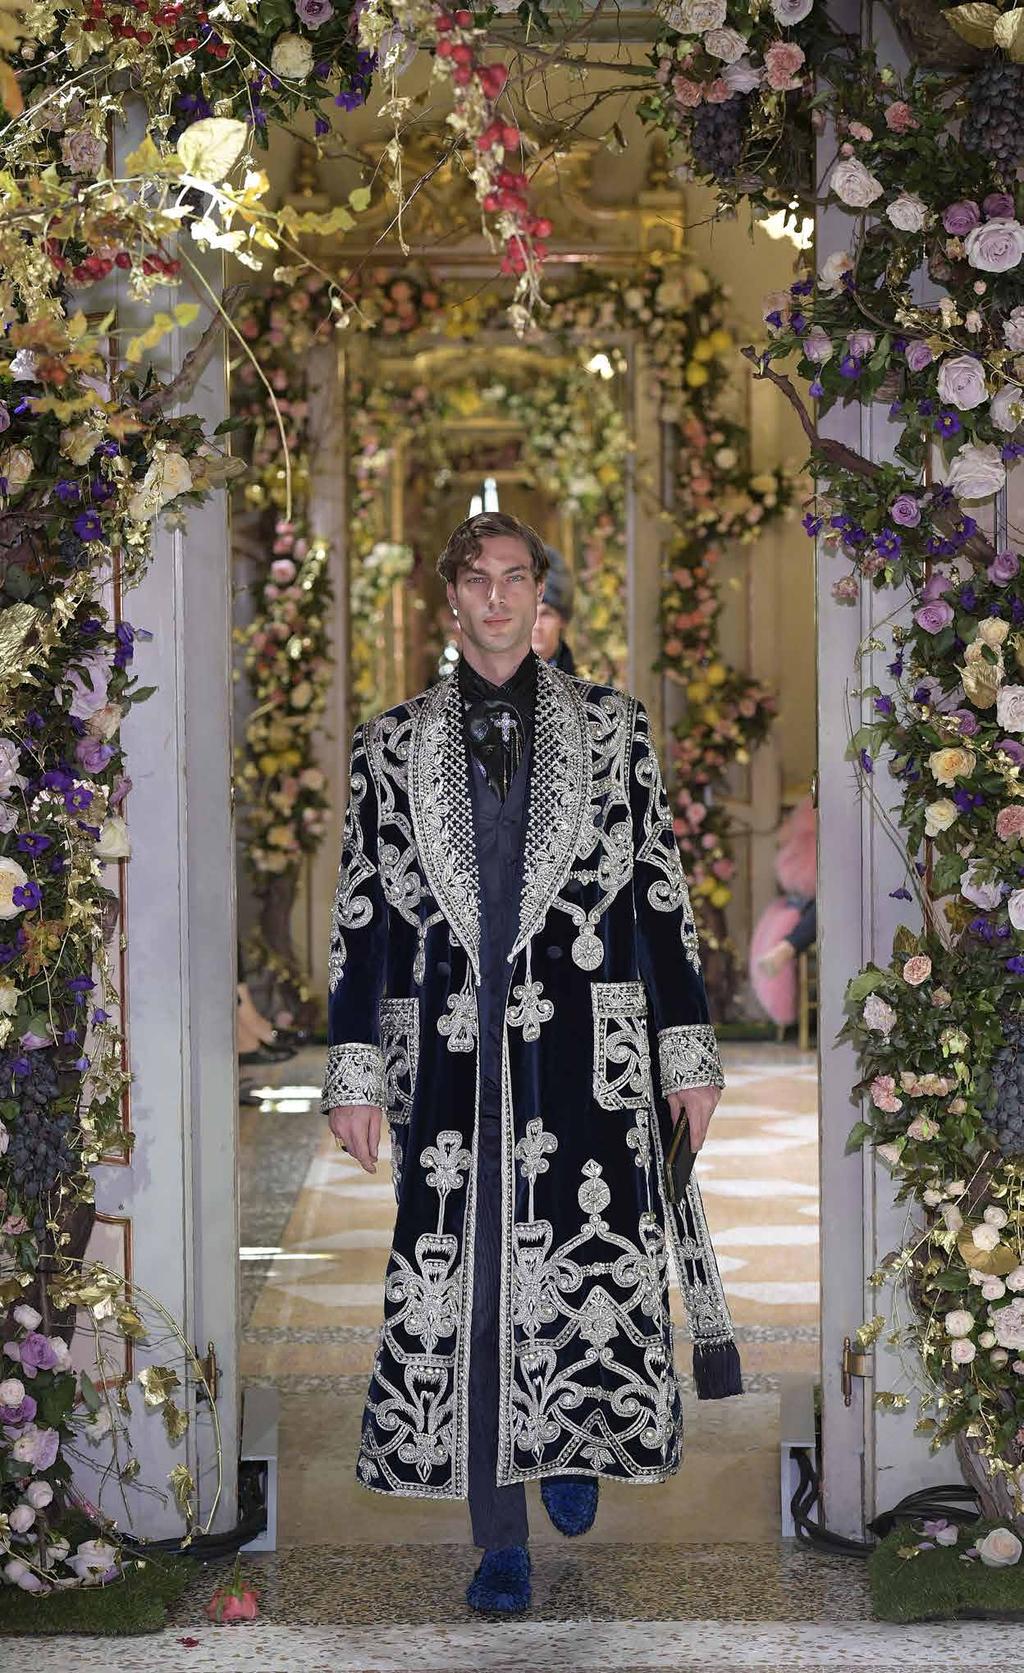 A model from the Alta Sartoria show by Dolce&Gabbana in the iconic frame of Palazzo Litta, December 8th 2018.